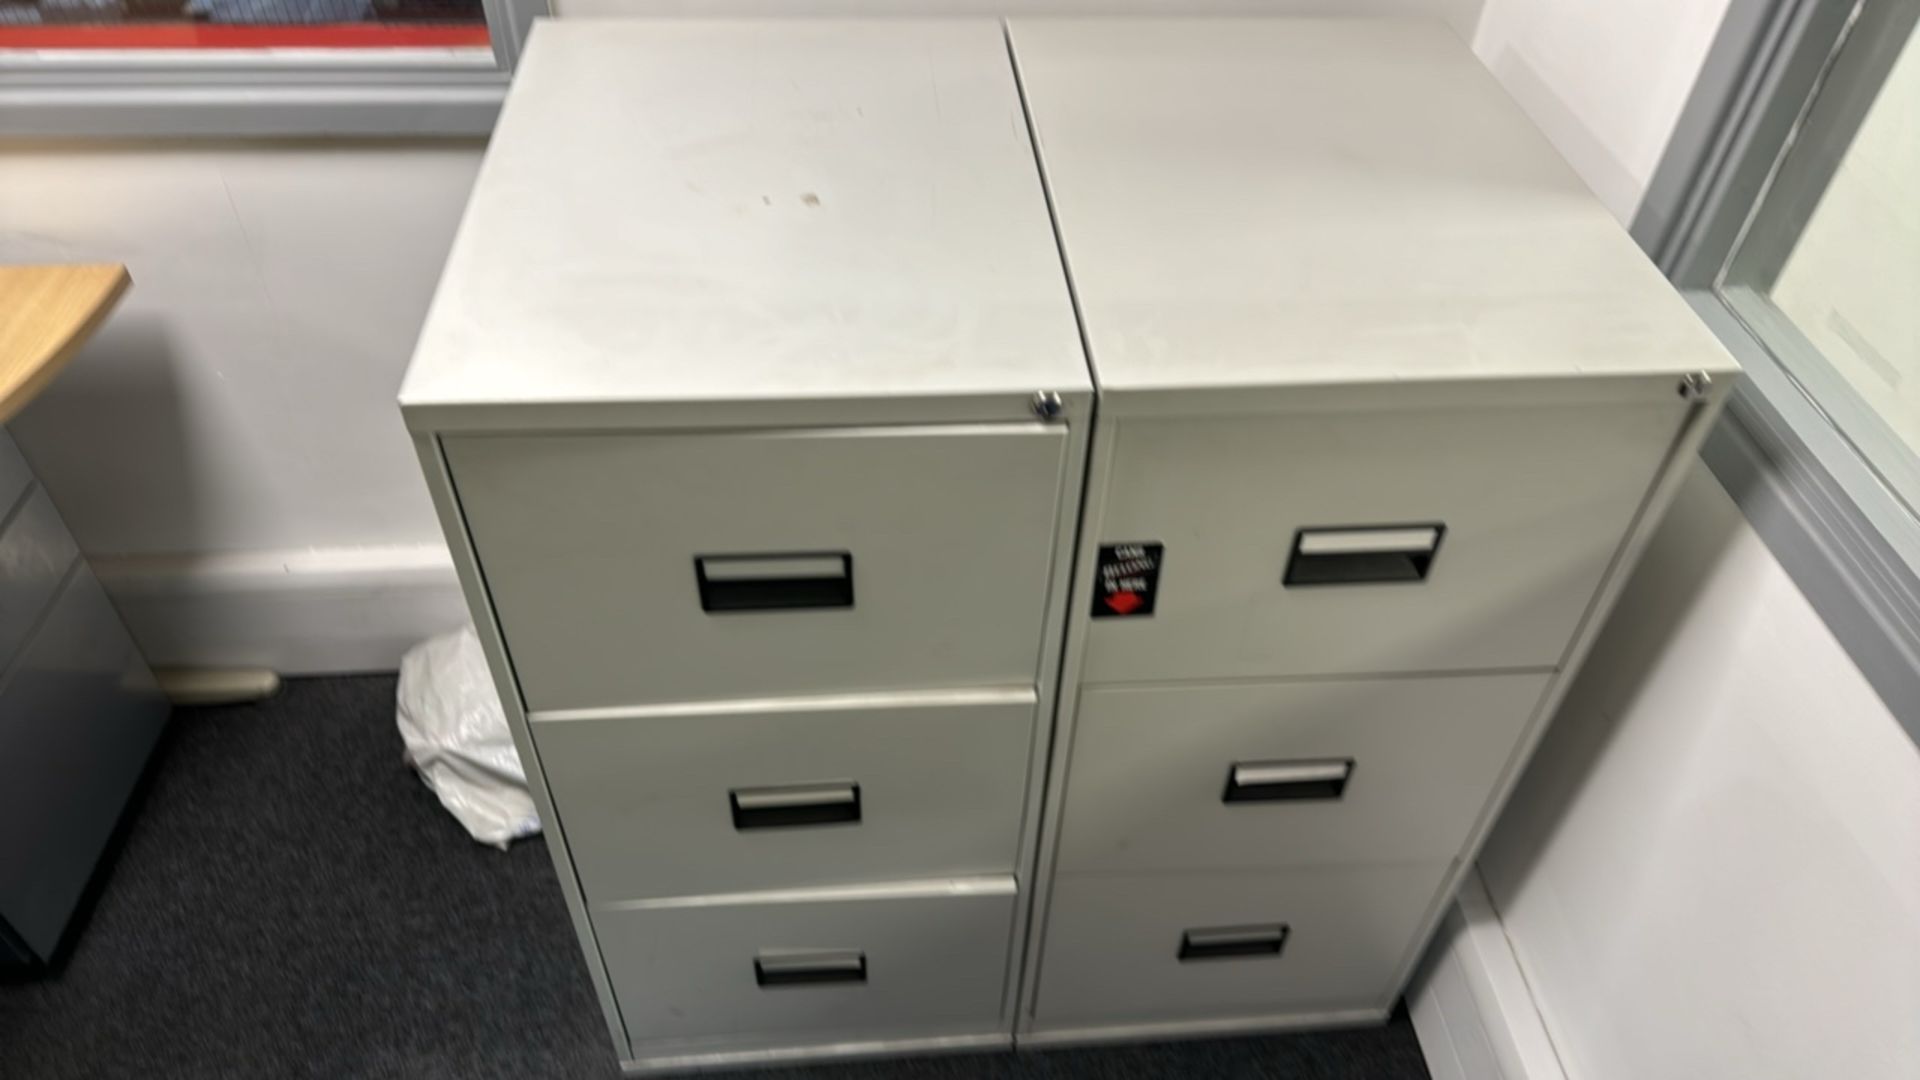 ref 401 - Metal Filing Cabinets x2 - Image 3 of 4